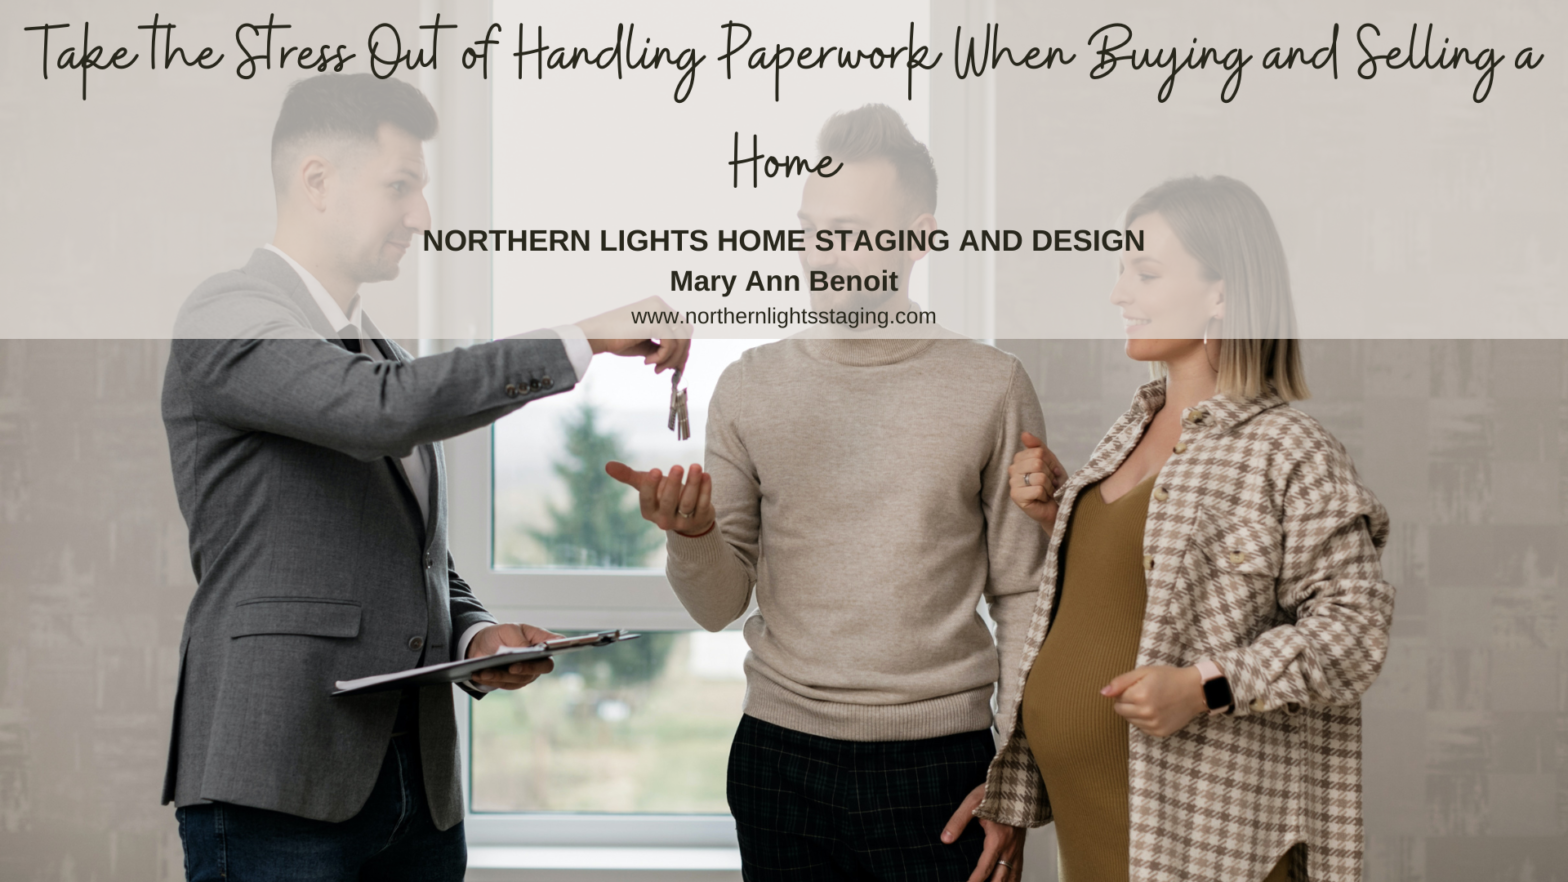 Take the Stress Out of Handling Paperwork When Buying and Selling a Home- Northern Lights Home Staging and Design